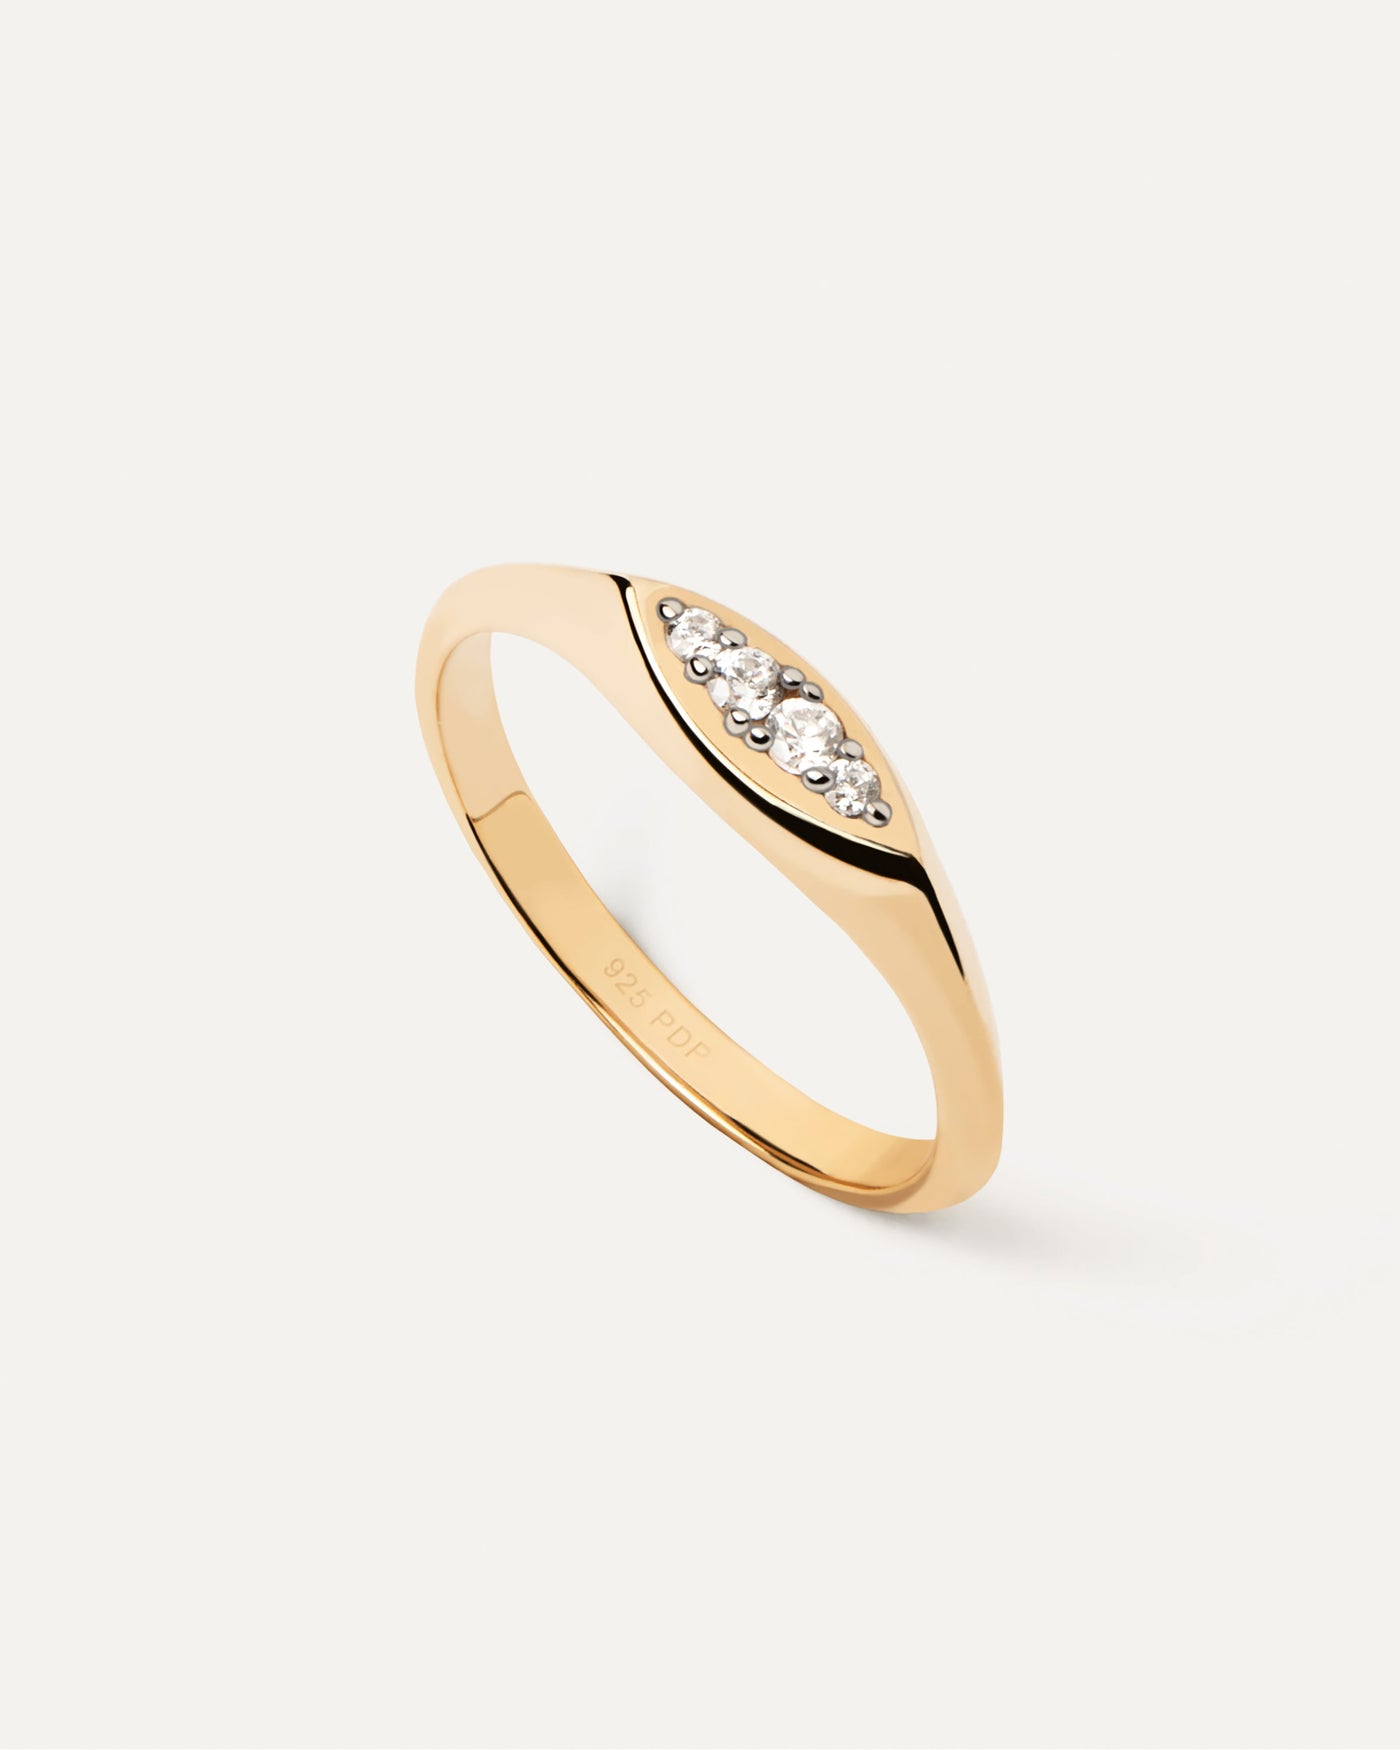 2023 Selection | Gala Stamp Ring. Gold-plated slim signet ring set with eye shape white zirconia multi-stone cluster . Get the latest arrival from PDPAOLA. Place your order safely and get this Best Seller. Free Shipping.